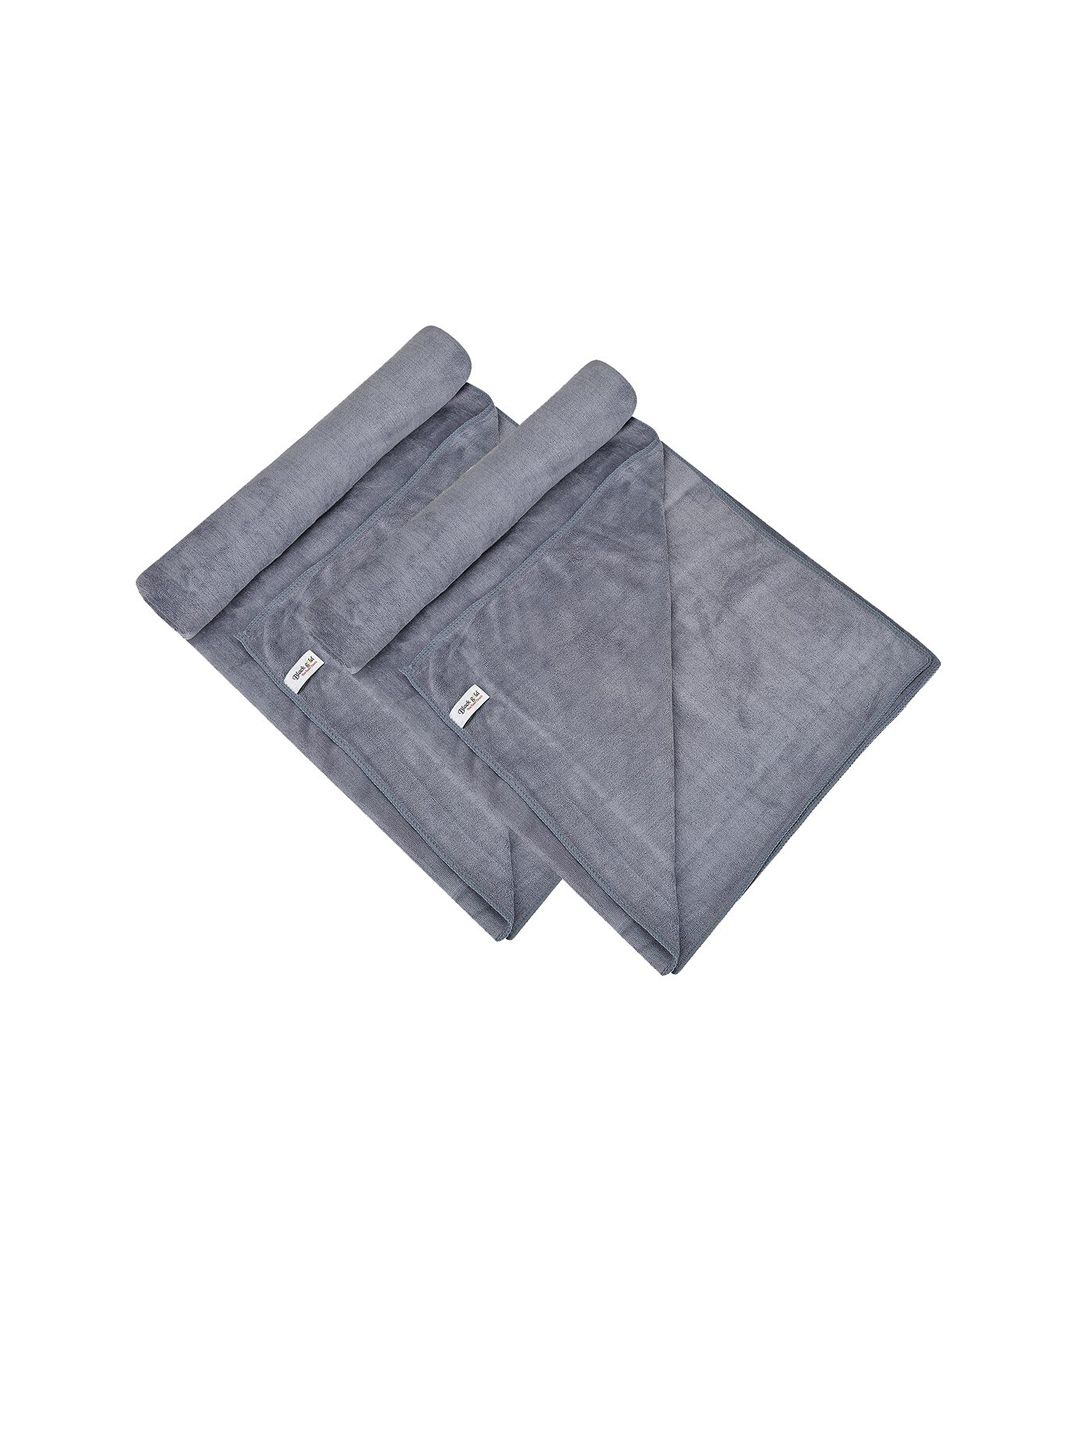 Black gold Pack Of 2 Grey Solid 400 GSM Microfiber Bath Towels Price in India